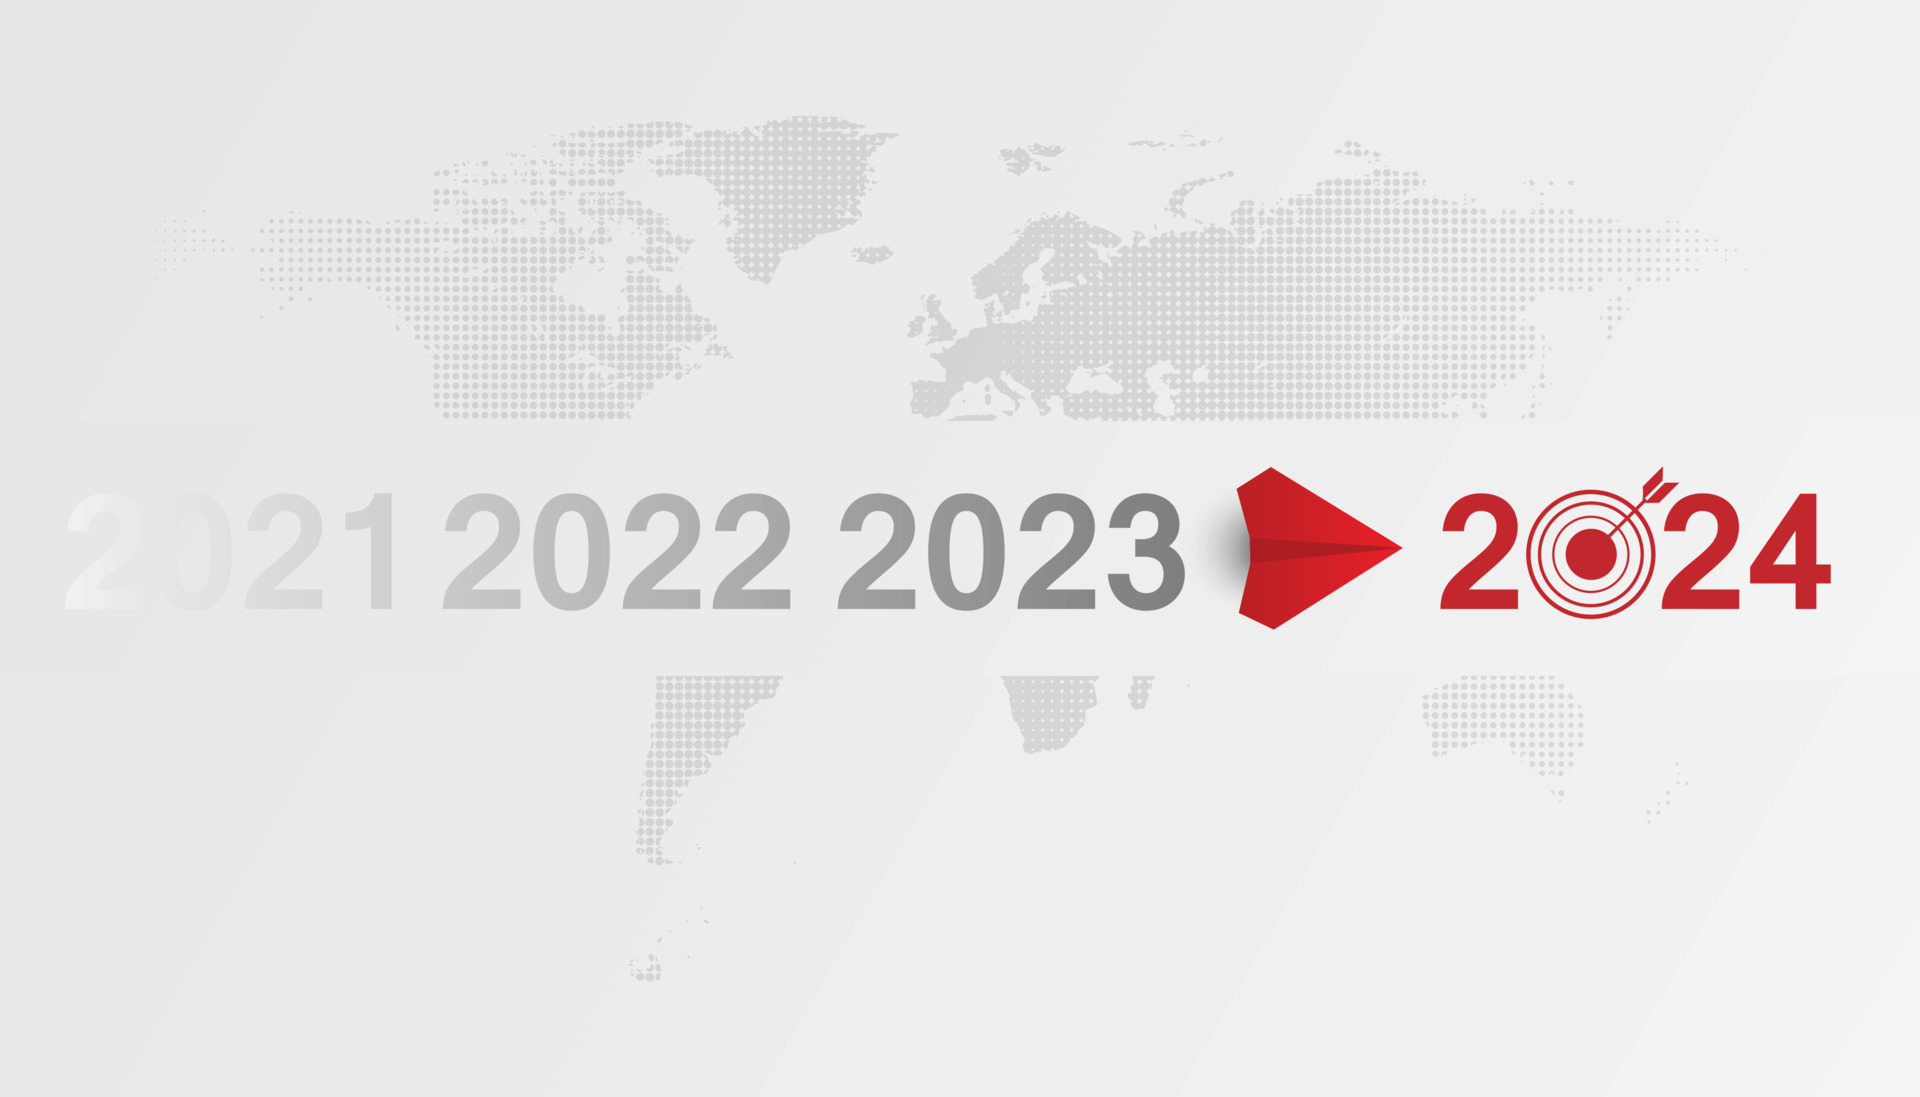 Red Plane Flying To 2024 Red Plane Heading Towards Goal Plan Action Vision 2024 Logo Icon New Year Logo 2024 Calendar Design Elements Elegant Contrast Numbers Layout Vector 